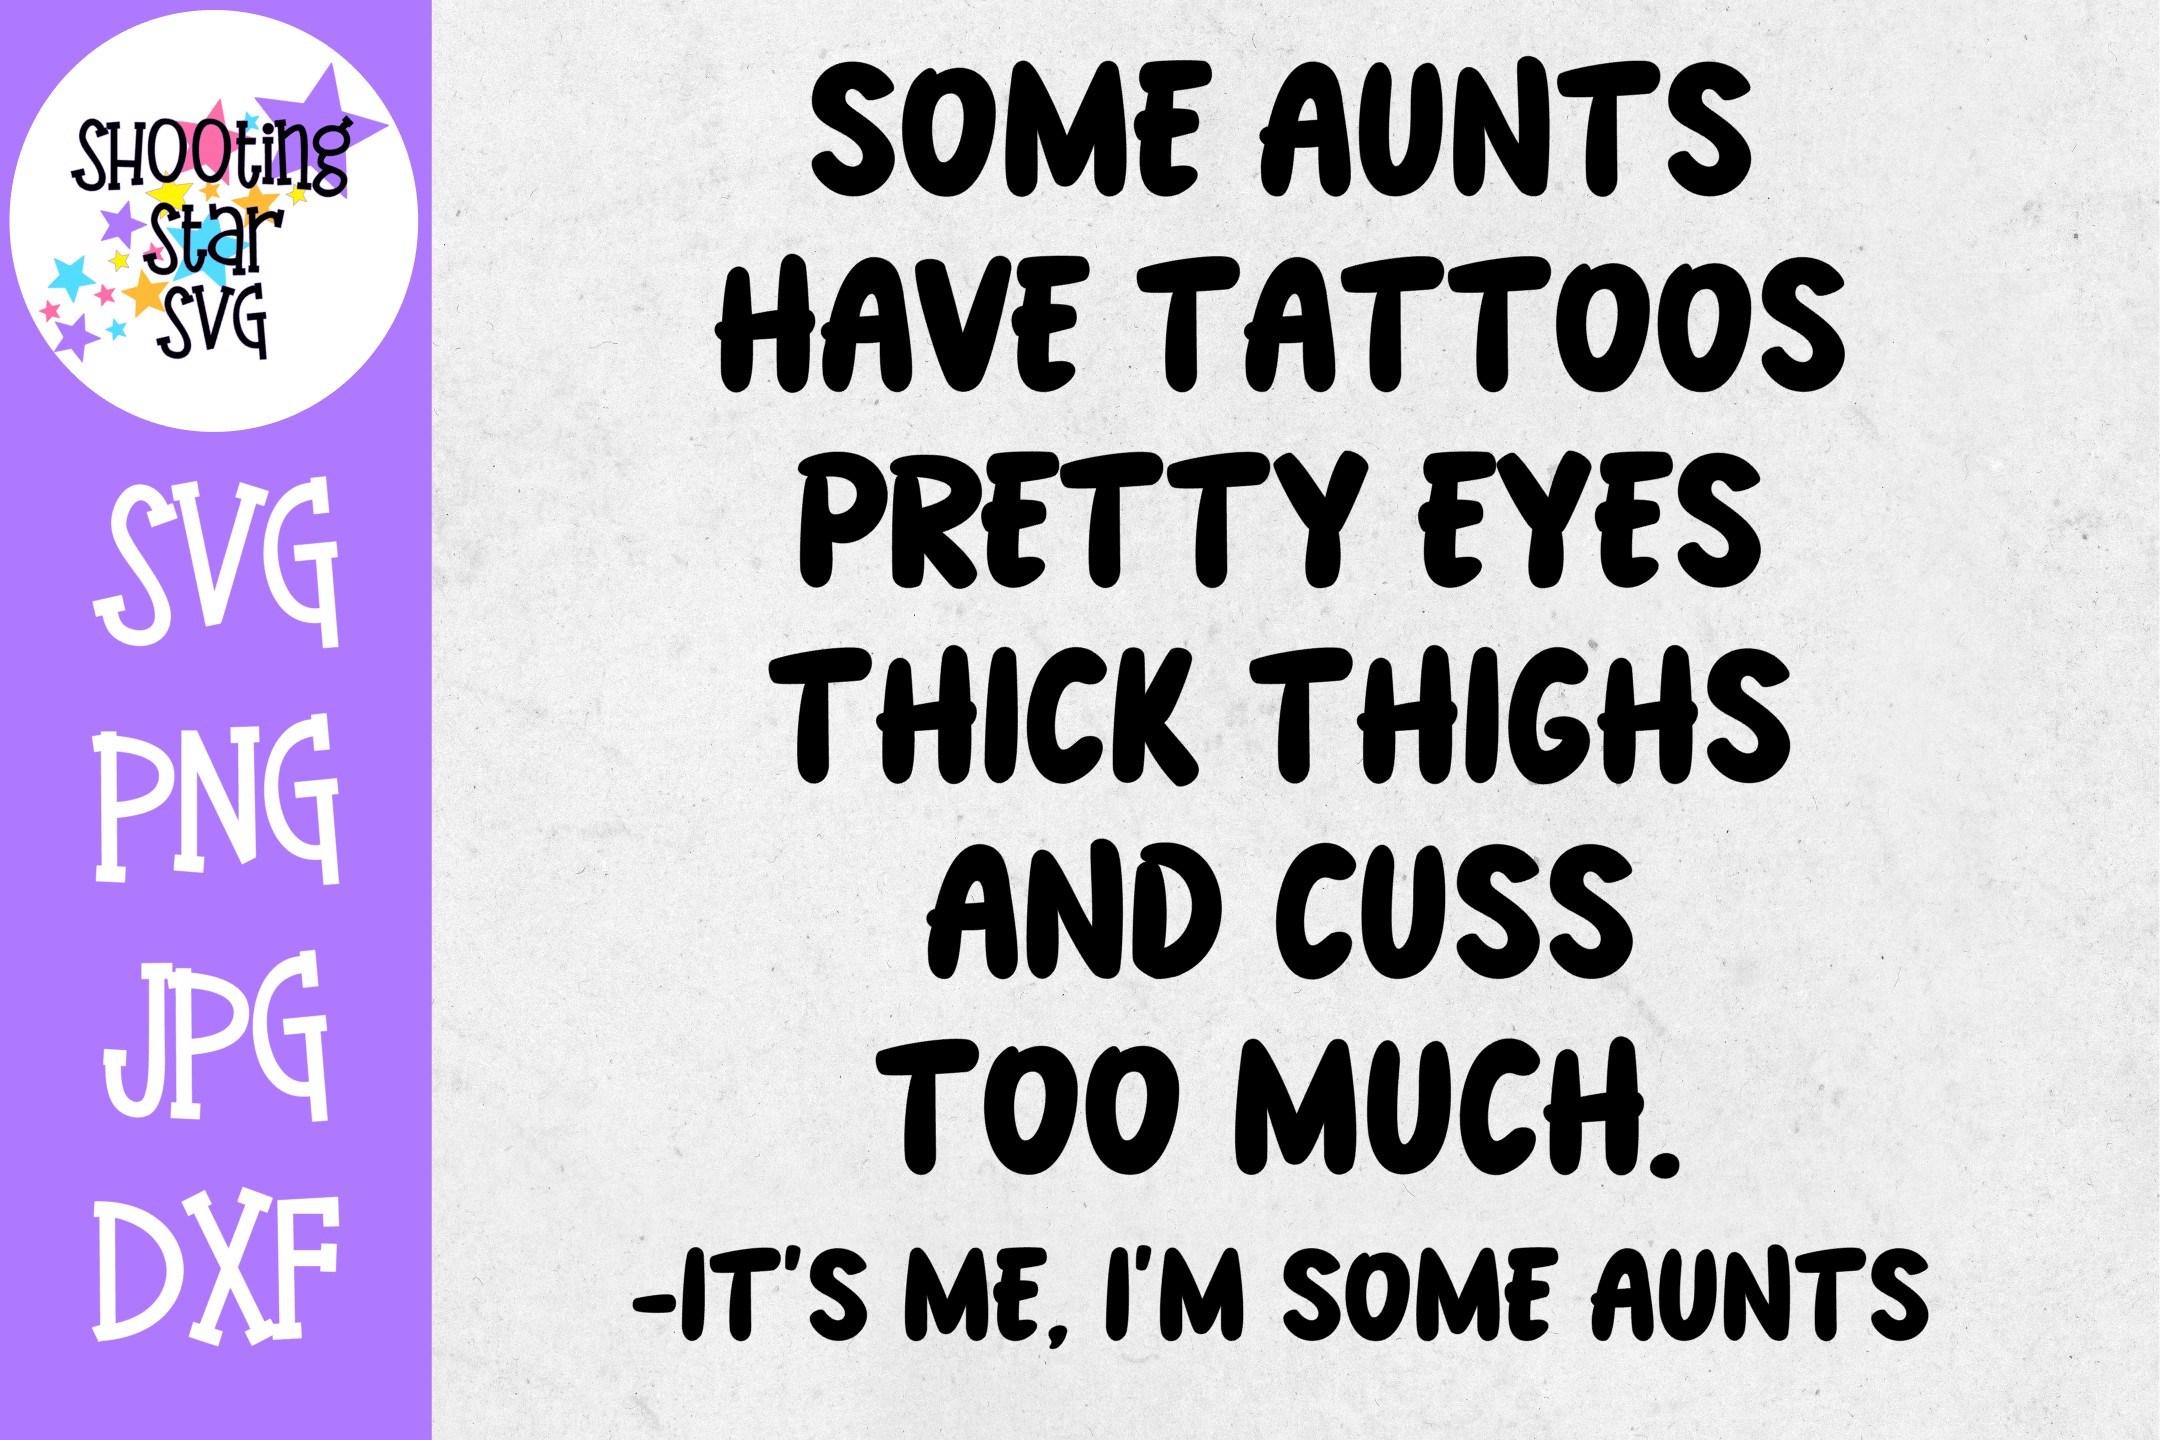 Download Some Aunts SVG - Cussing and Tattoos - Funny SVG - Aunt SVG